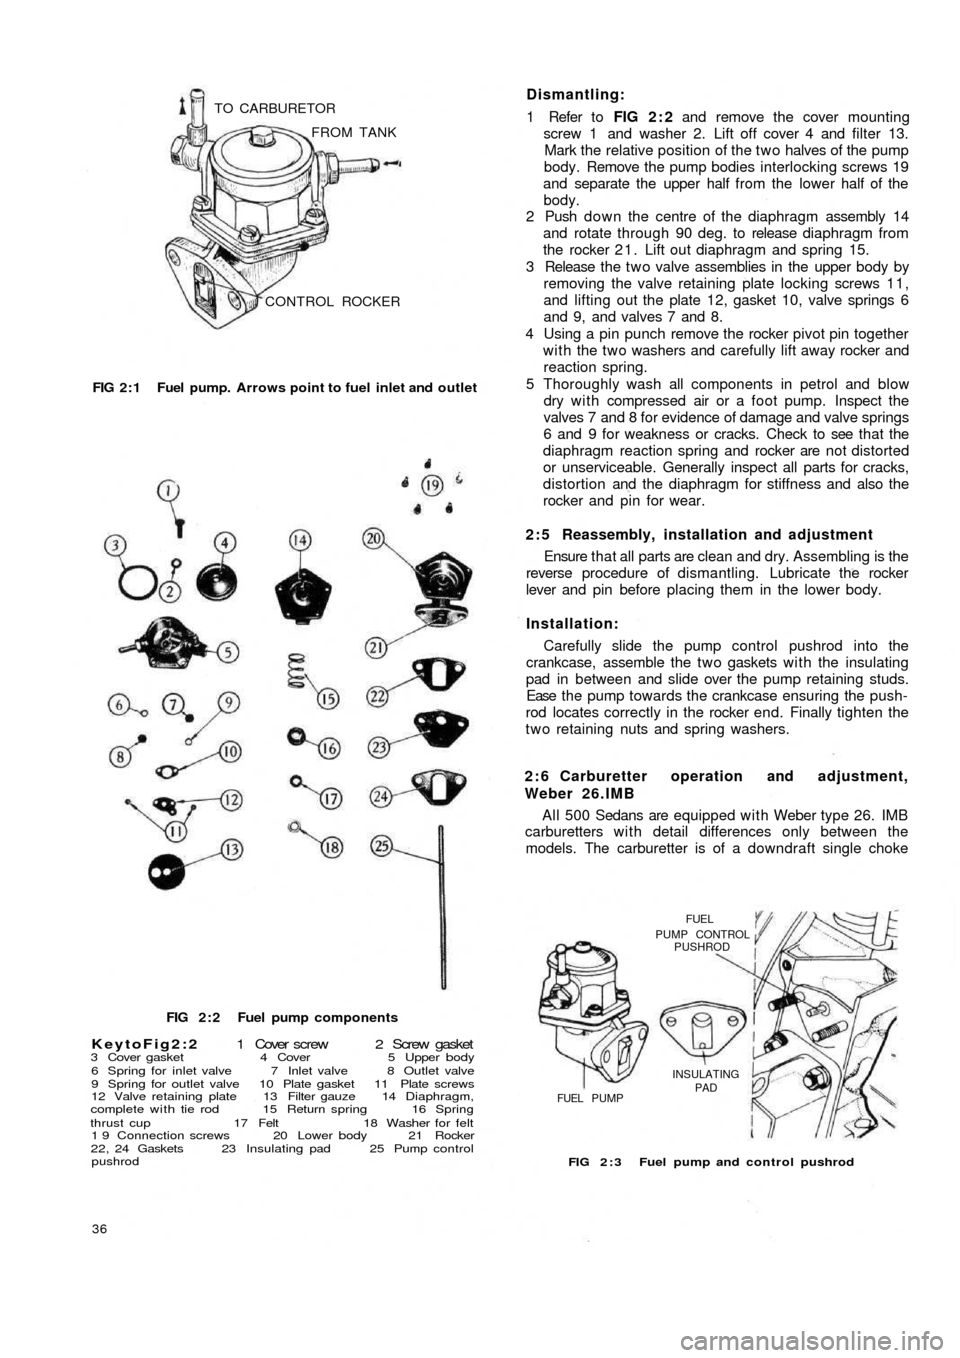 FIAT 500 1966 1.G Workshop Manual CONTROL ROCKER FROM TANK TO CARBURETOR
FIG 2 : 1  Fuel pump. Arrows point to fuel  inlet and outlet
FIG 2 : 2  Fuel pump components
KeytoFig2:2 1  Cover  screw  2  Screw  gasket3 Cover gasket 4 Cover 